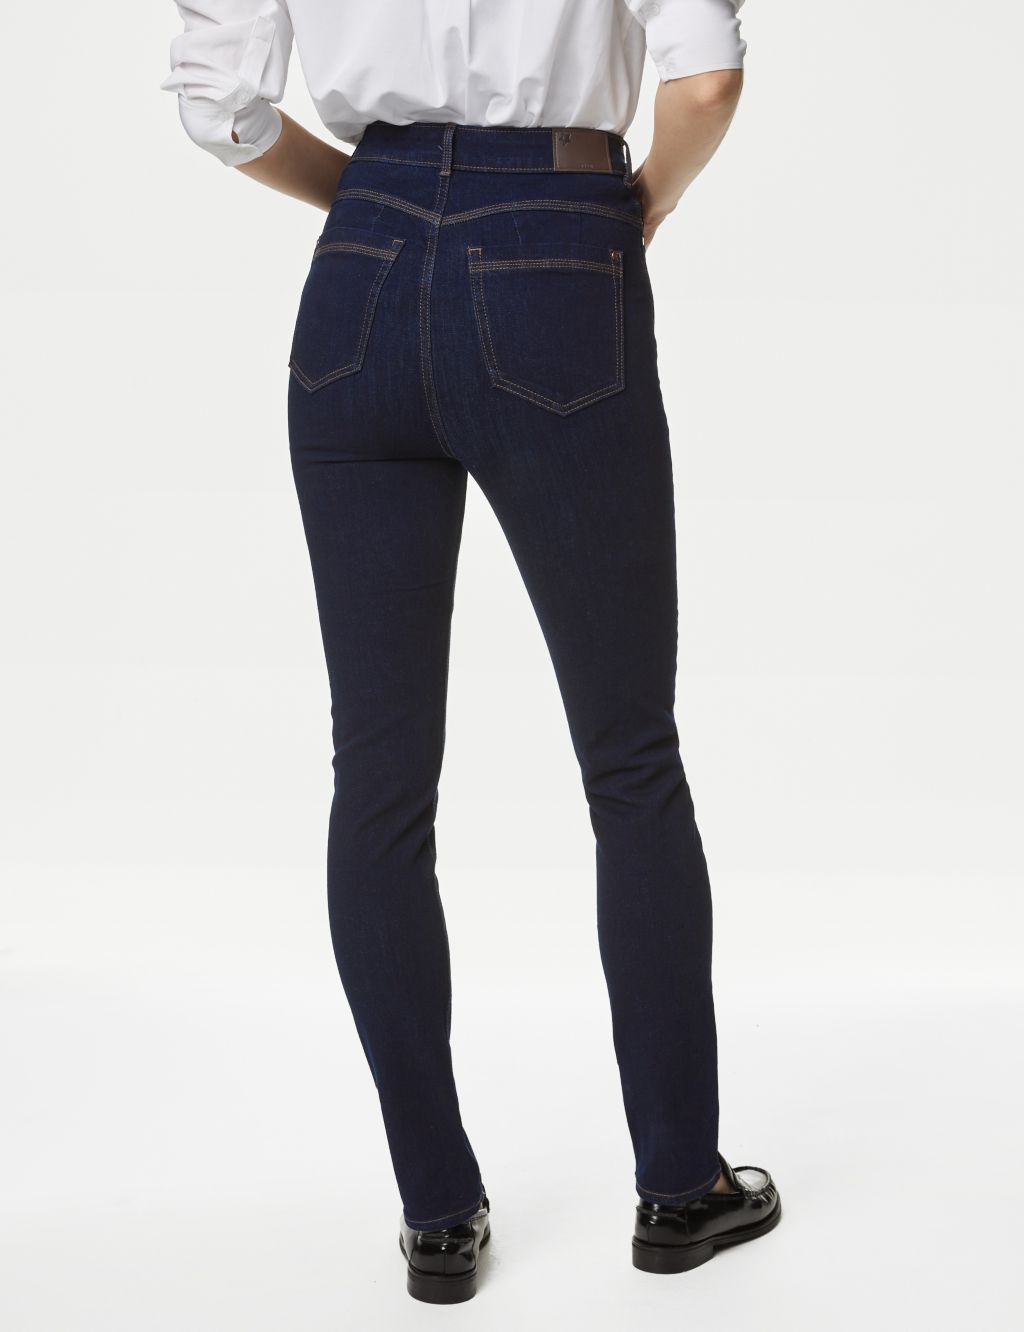 Lily Magic Shaping High Waisted Jeans image 4